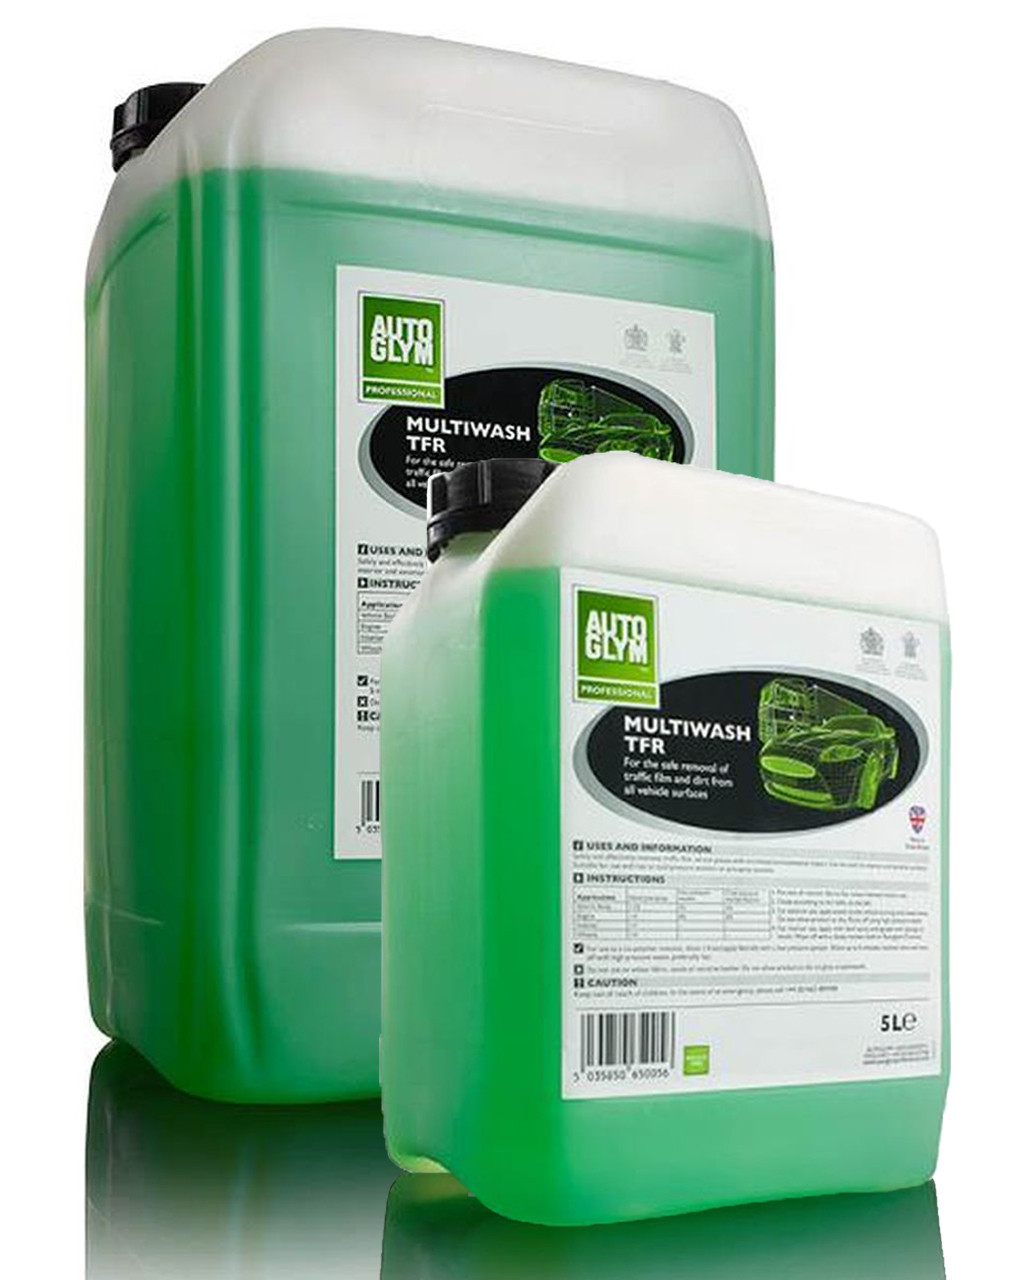 Autoglym Multiwash TFR - Available in sizes from 5L to 1000L